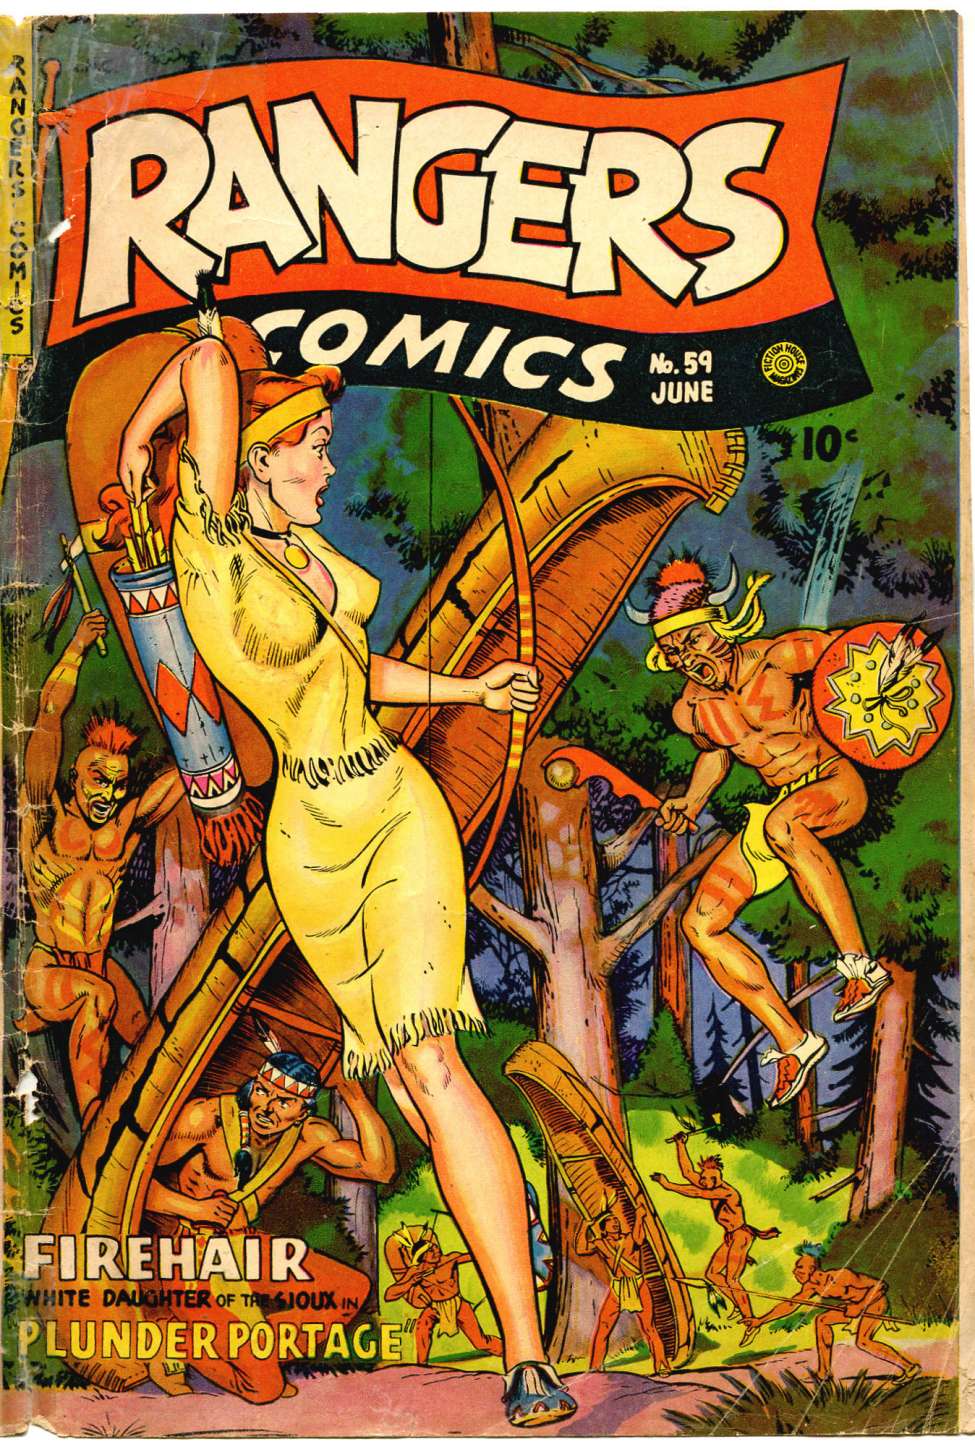 Book Cover For Rangers Comics 59